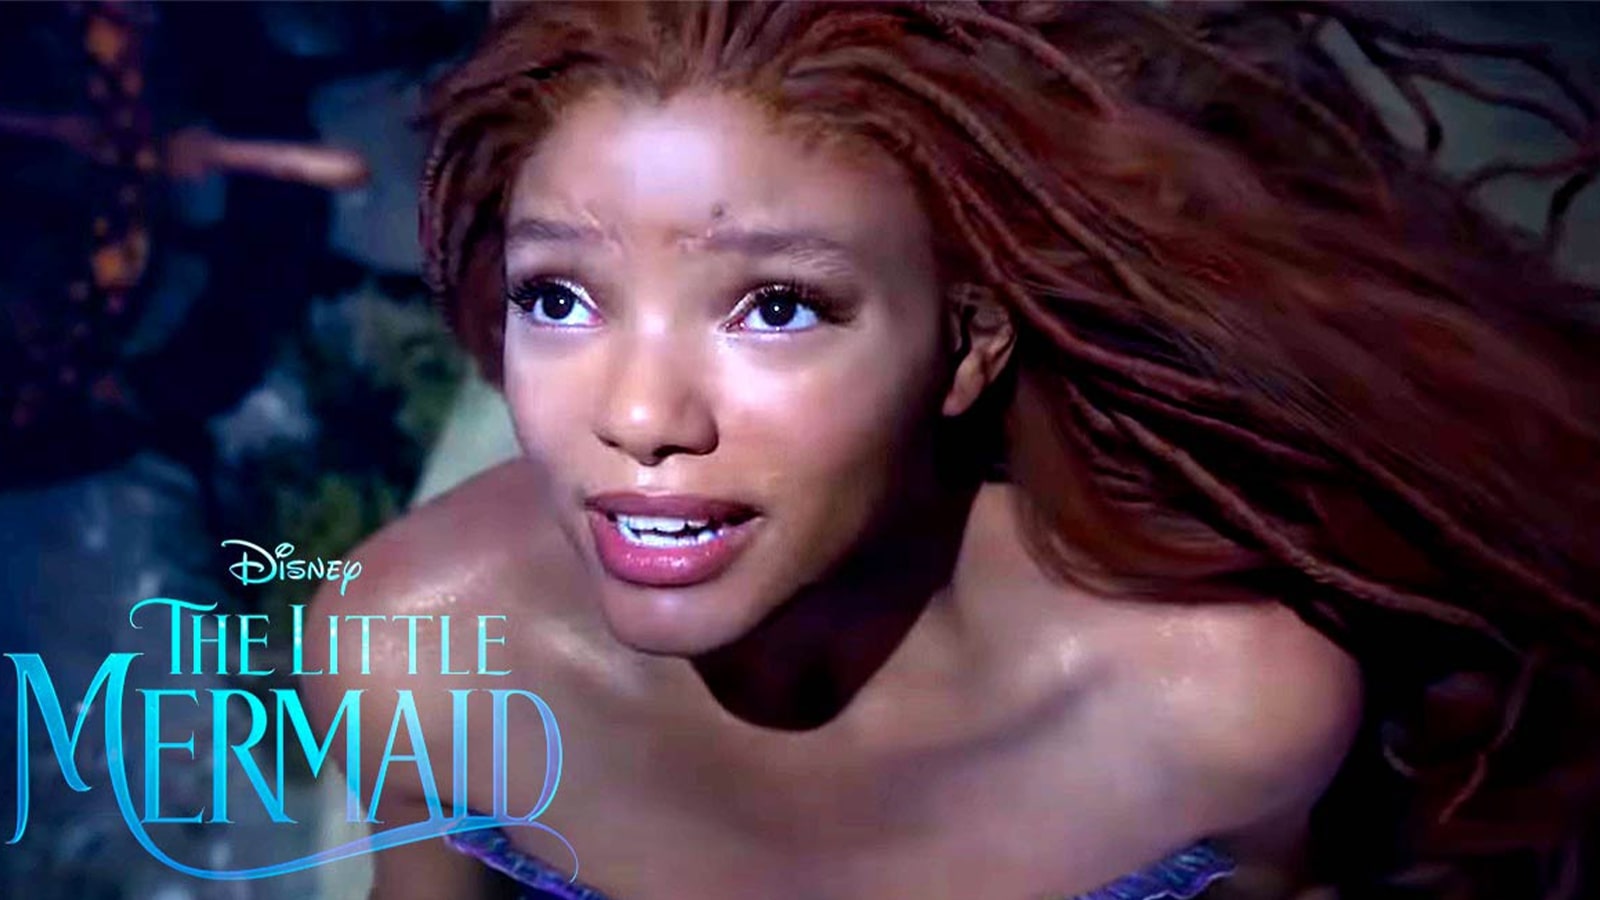 The Little Mermaid liveaction film Release date, cast, trailers, and